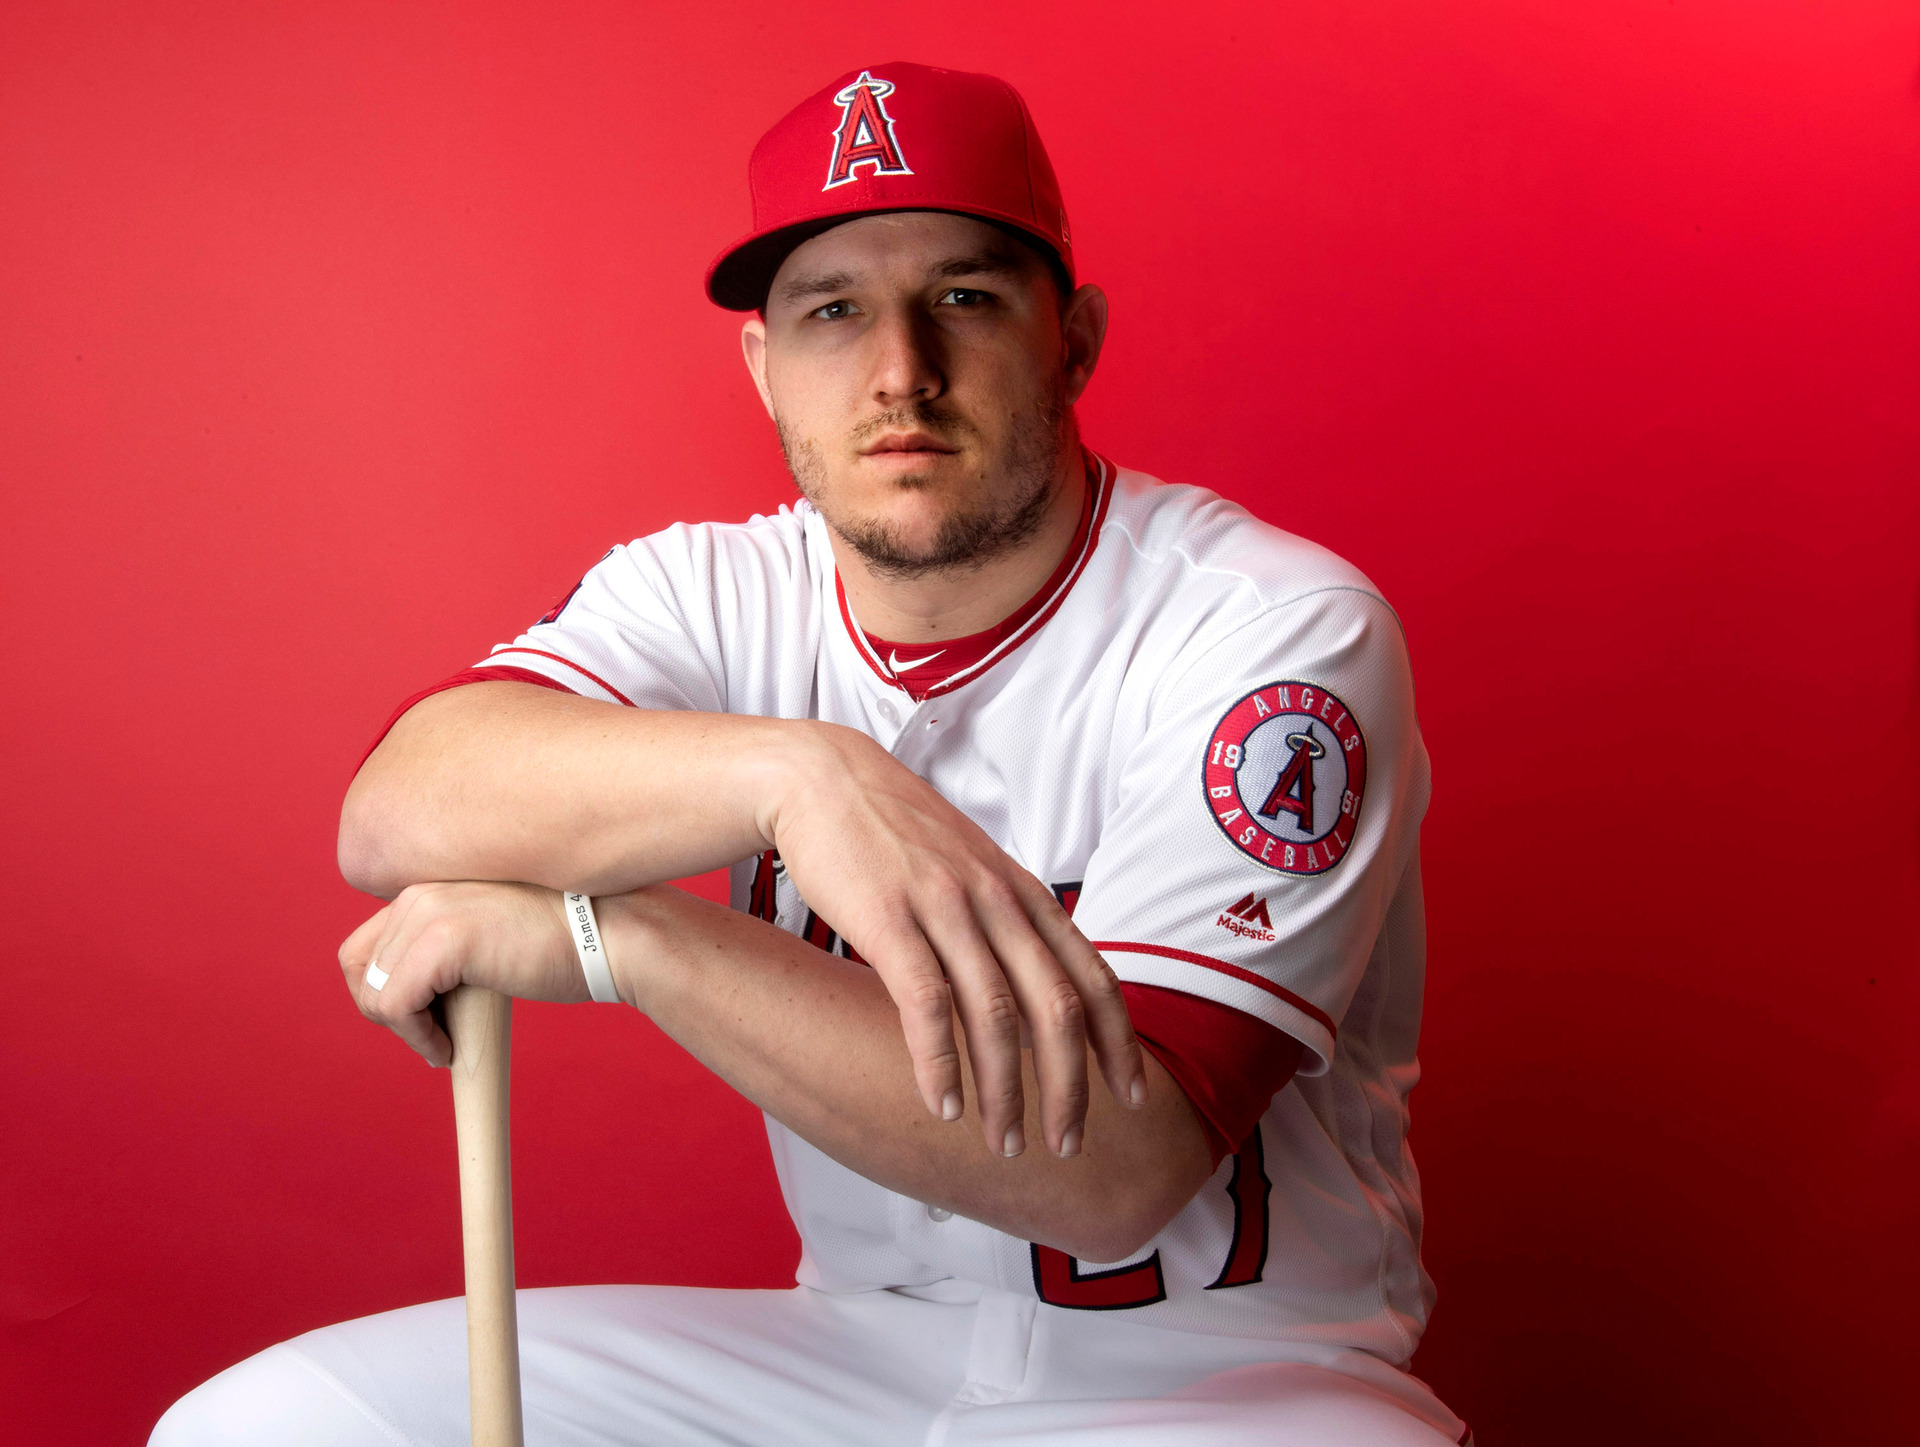 Baseball: Rise of MLB star Mike Trout continues with $626 million